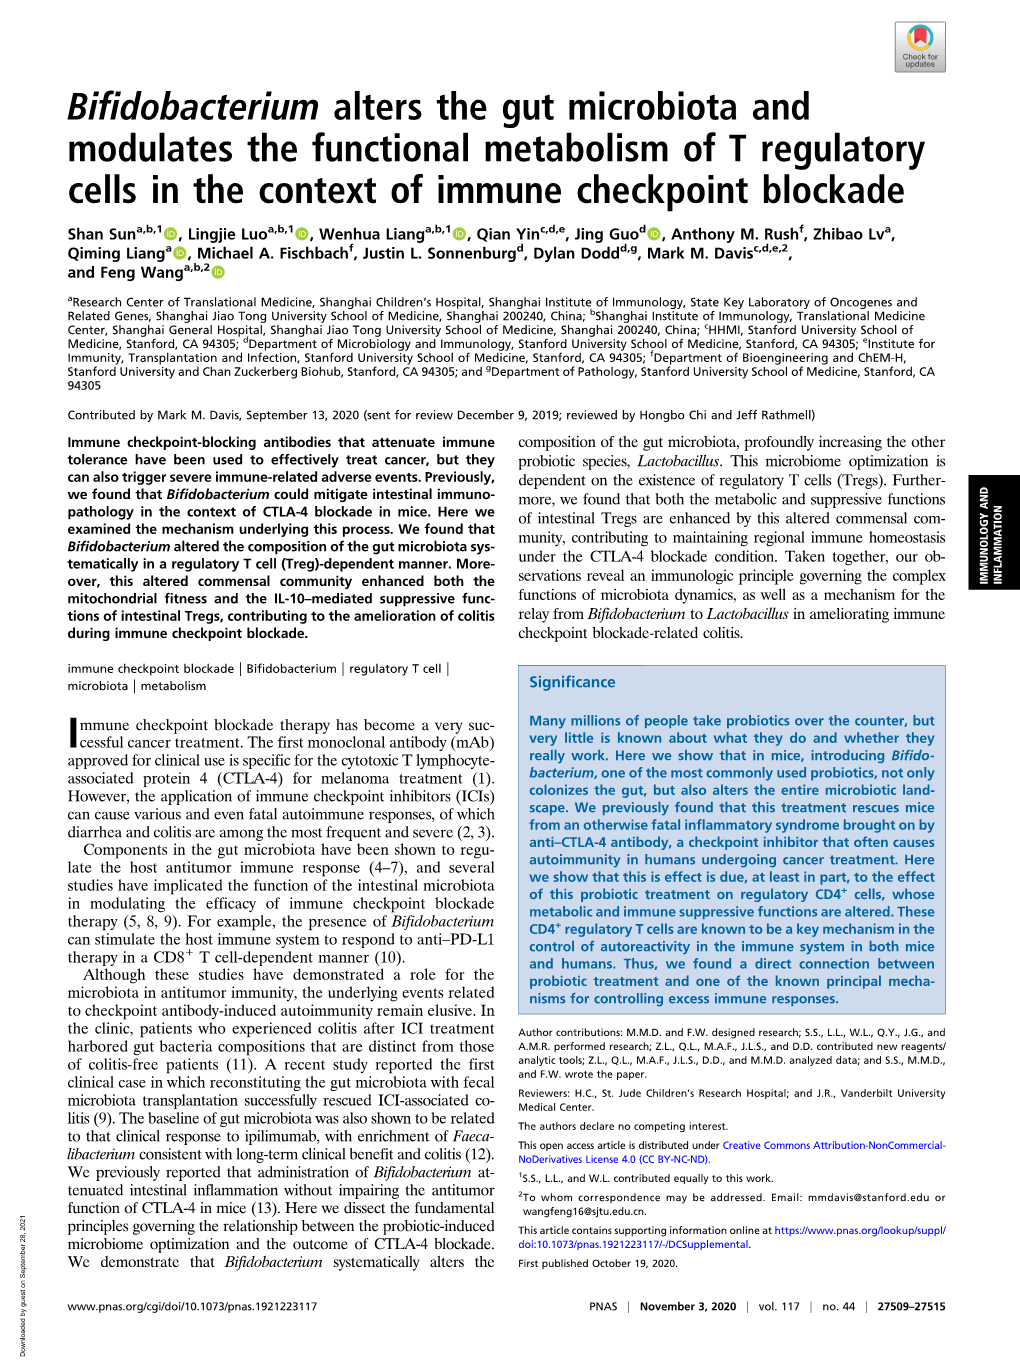 Bifidobacterium Alters the Gut Microbiota and Modulates the Functional Metabolism of T Regulatory Cells in the Context of Immune Checkpoint Blockade